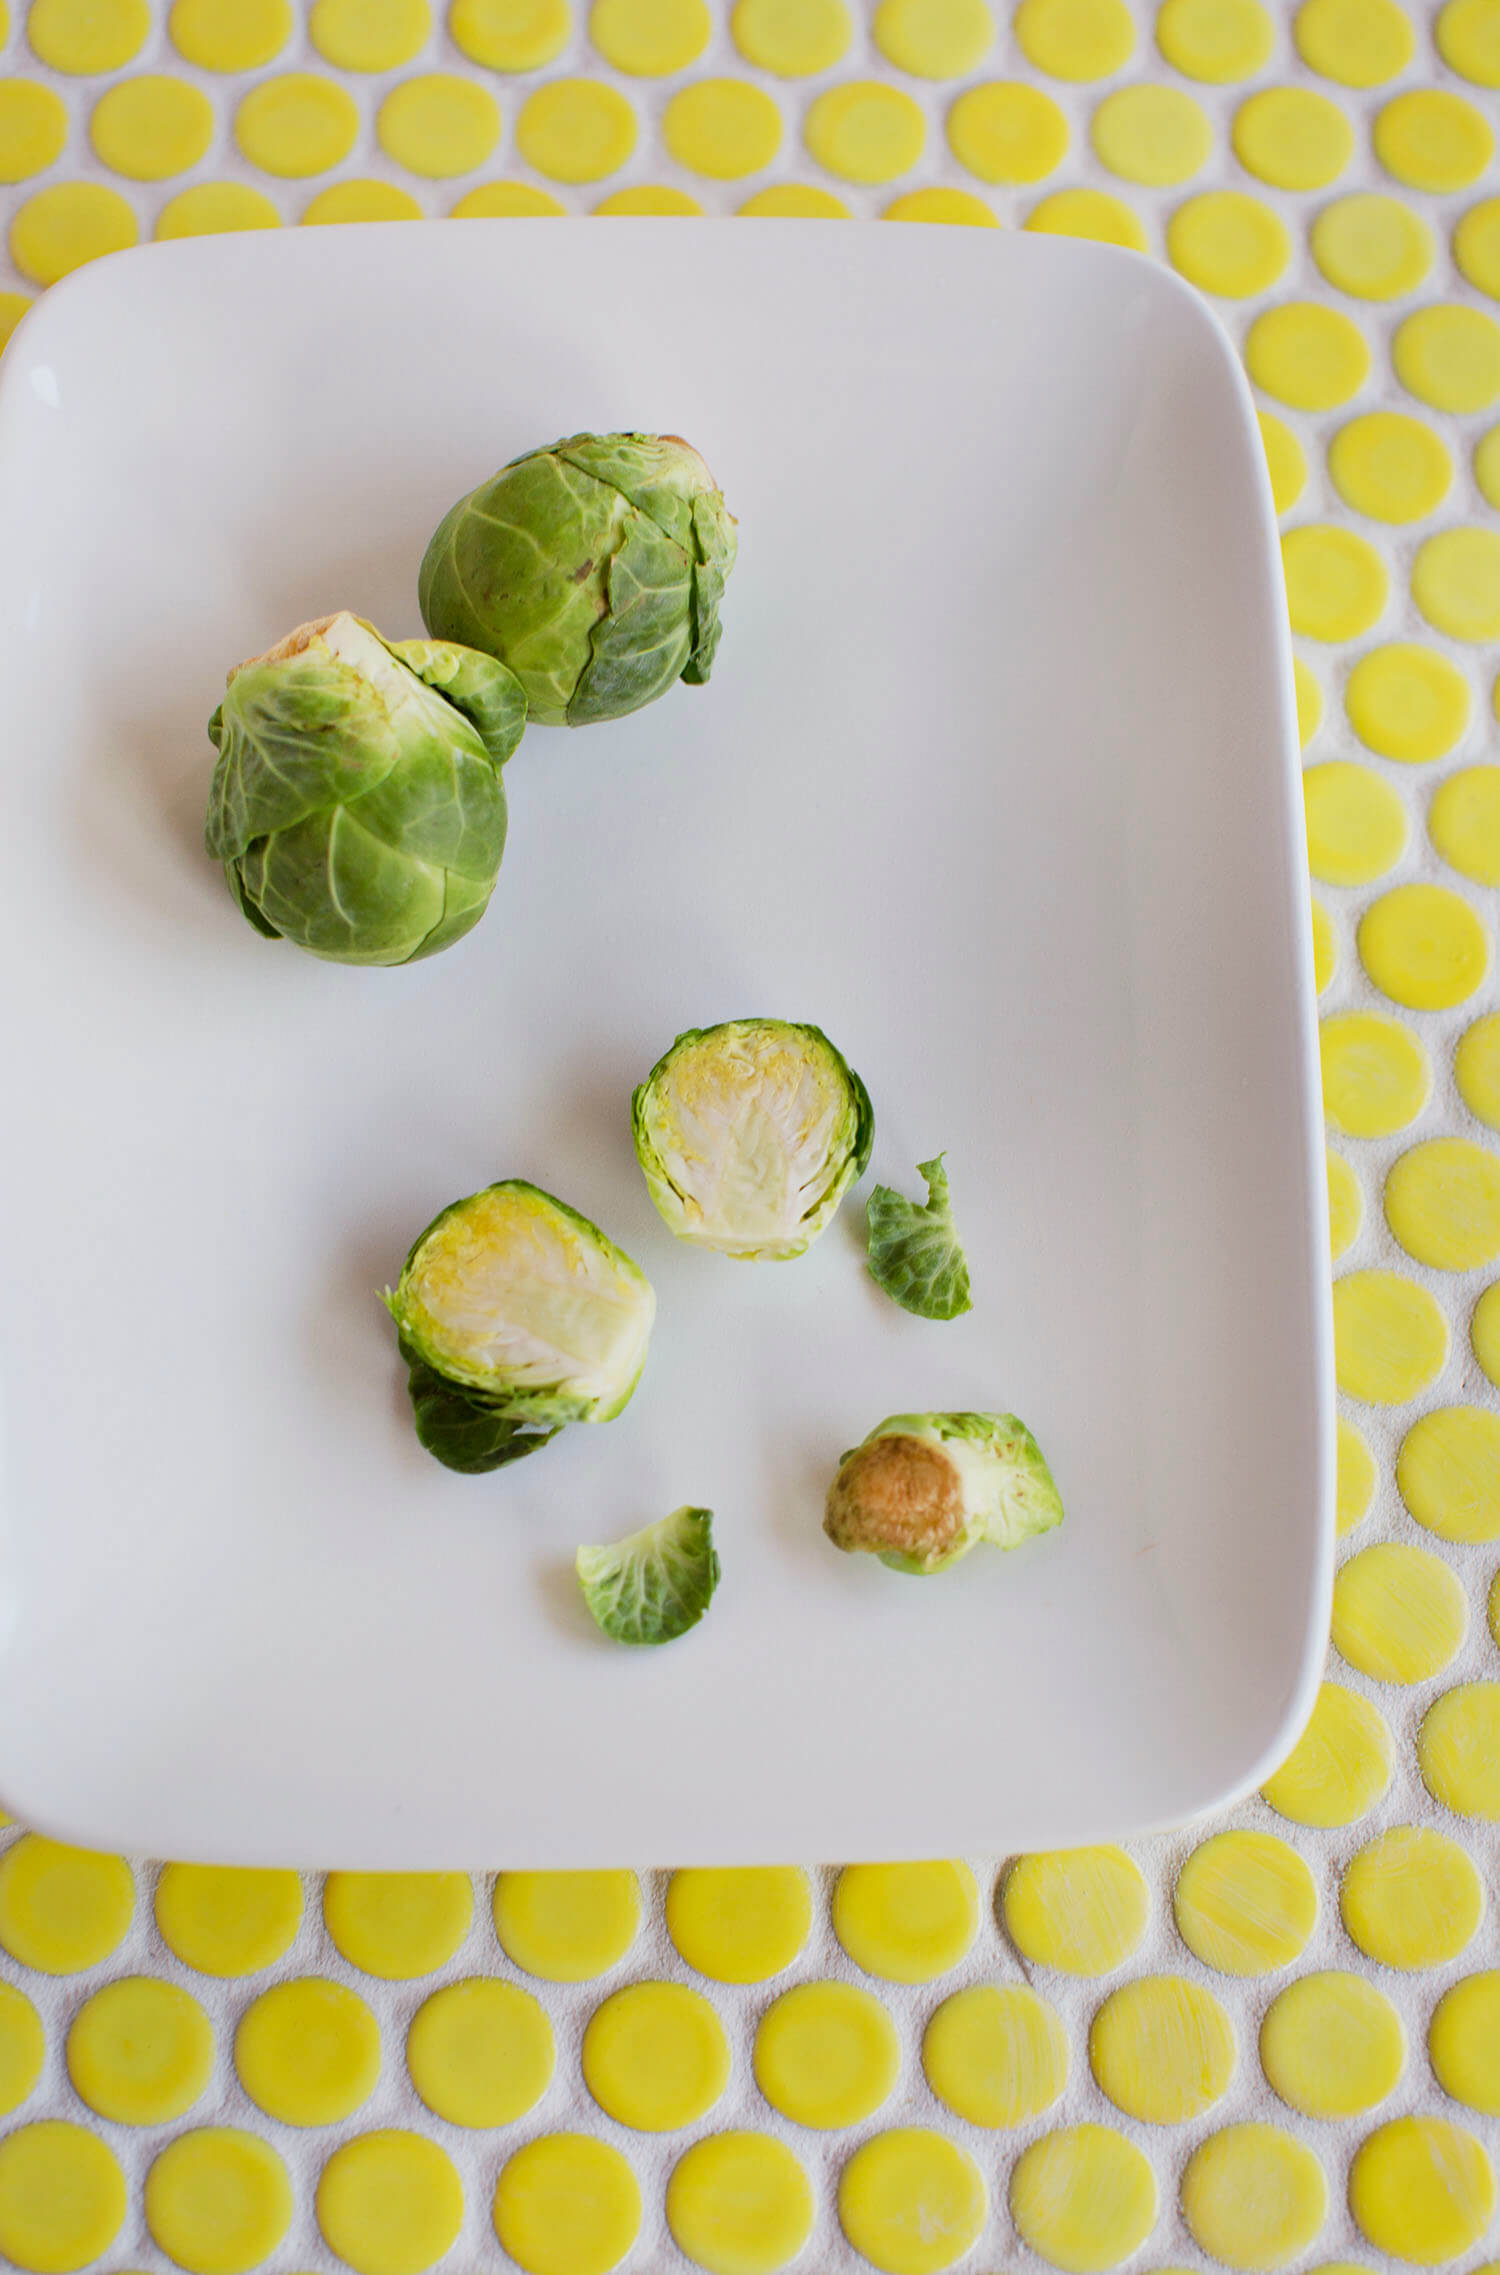 How to bake brussels sprouts